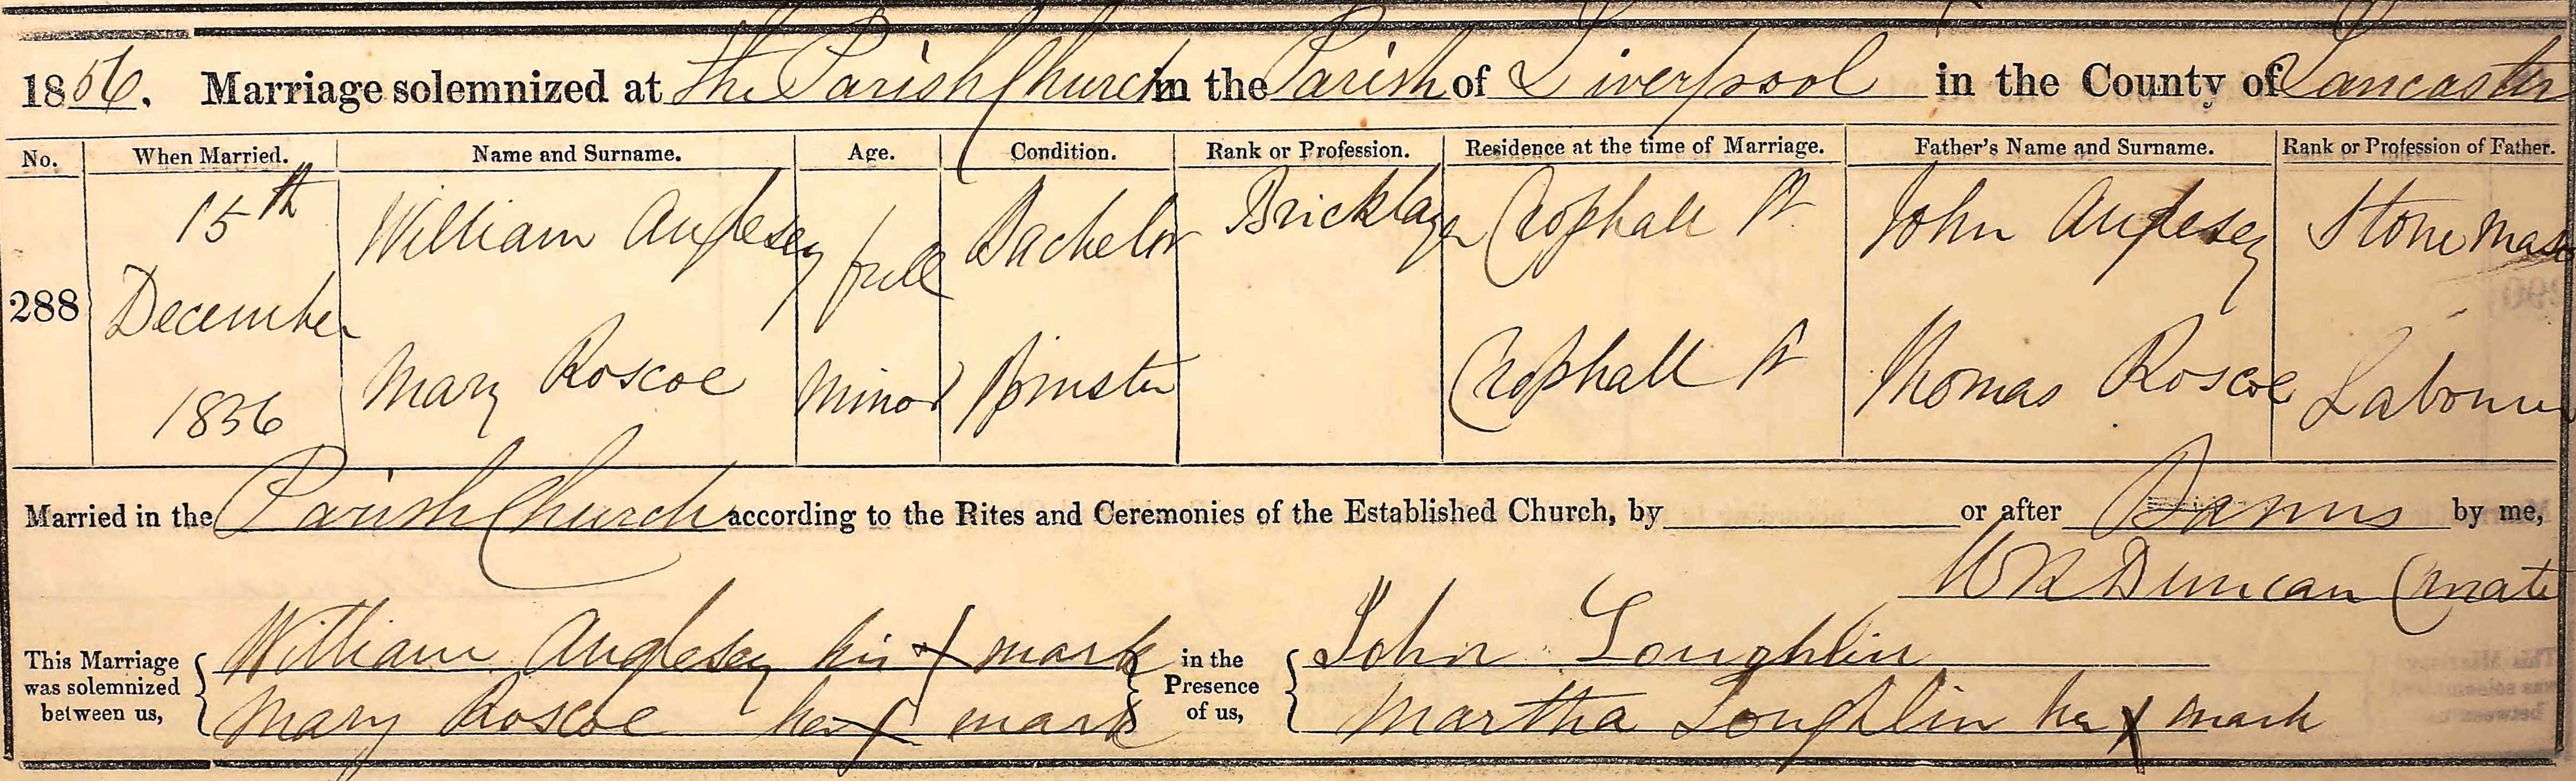 Taken on December 15th, 1856 and sourced from Certificate - Marriage.